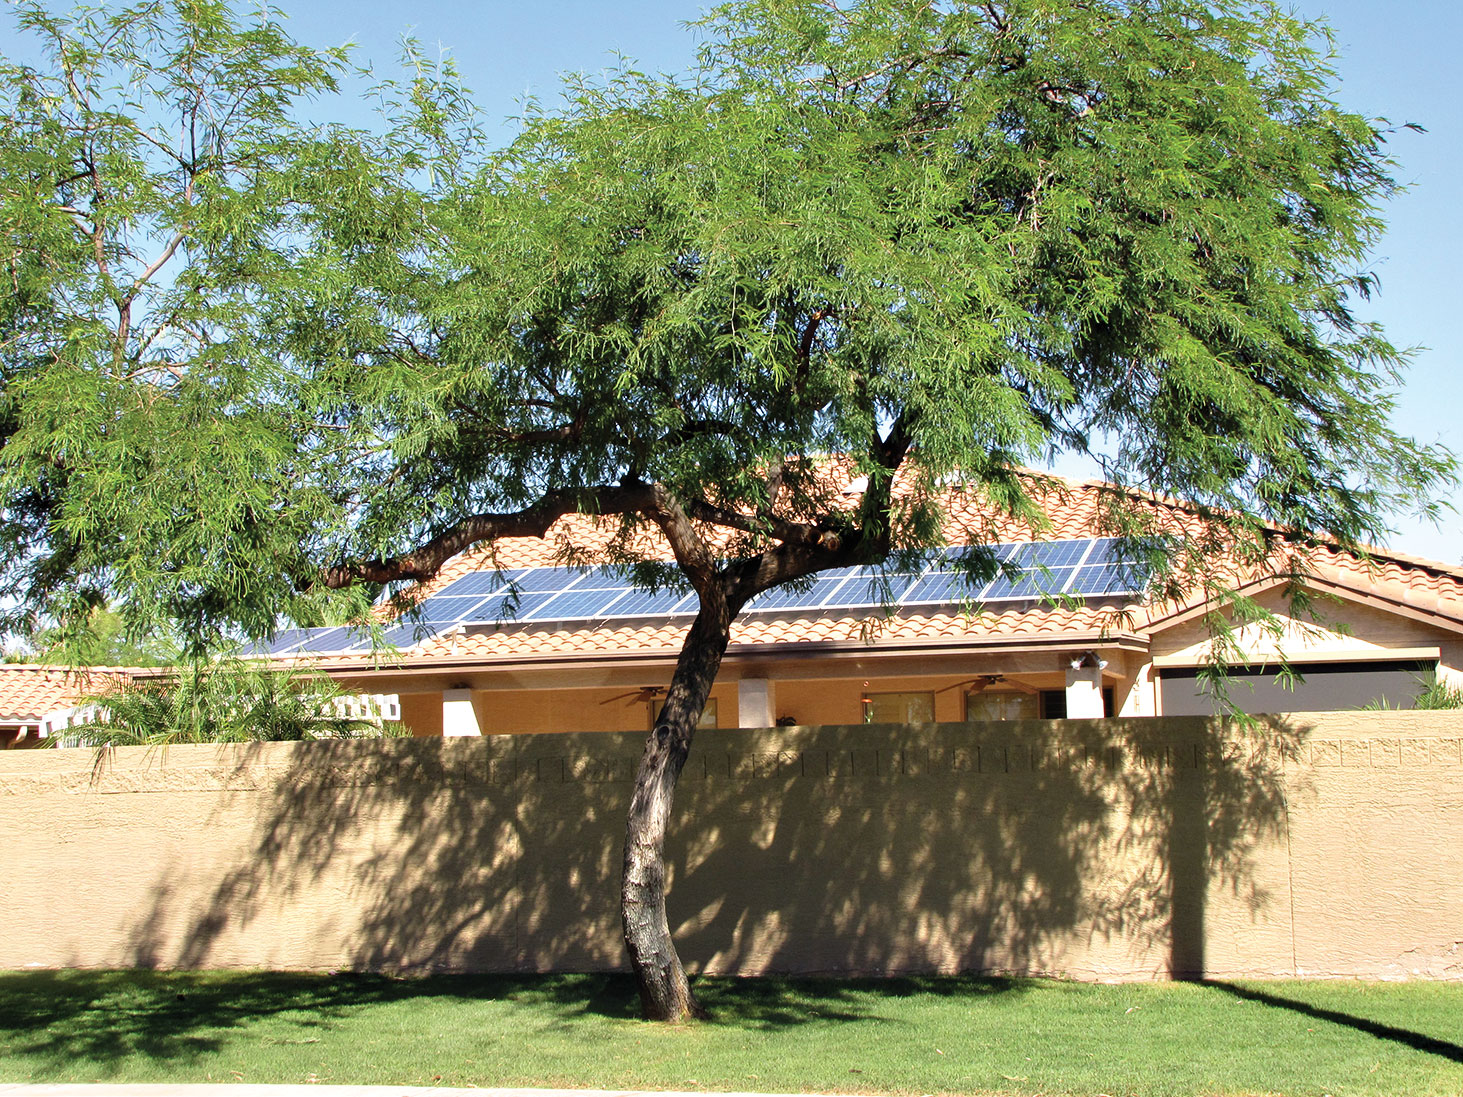 Tree 54, a handsome mesquite located on the north side of Clubhouse Drive near Sarival Avenue, has a replacement value of $3250.